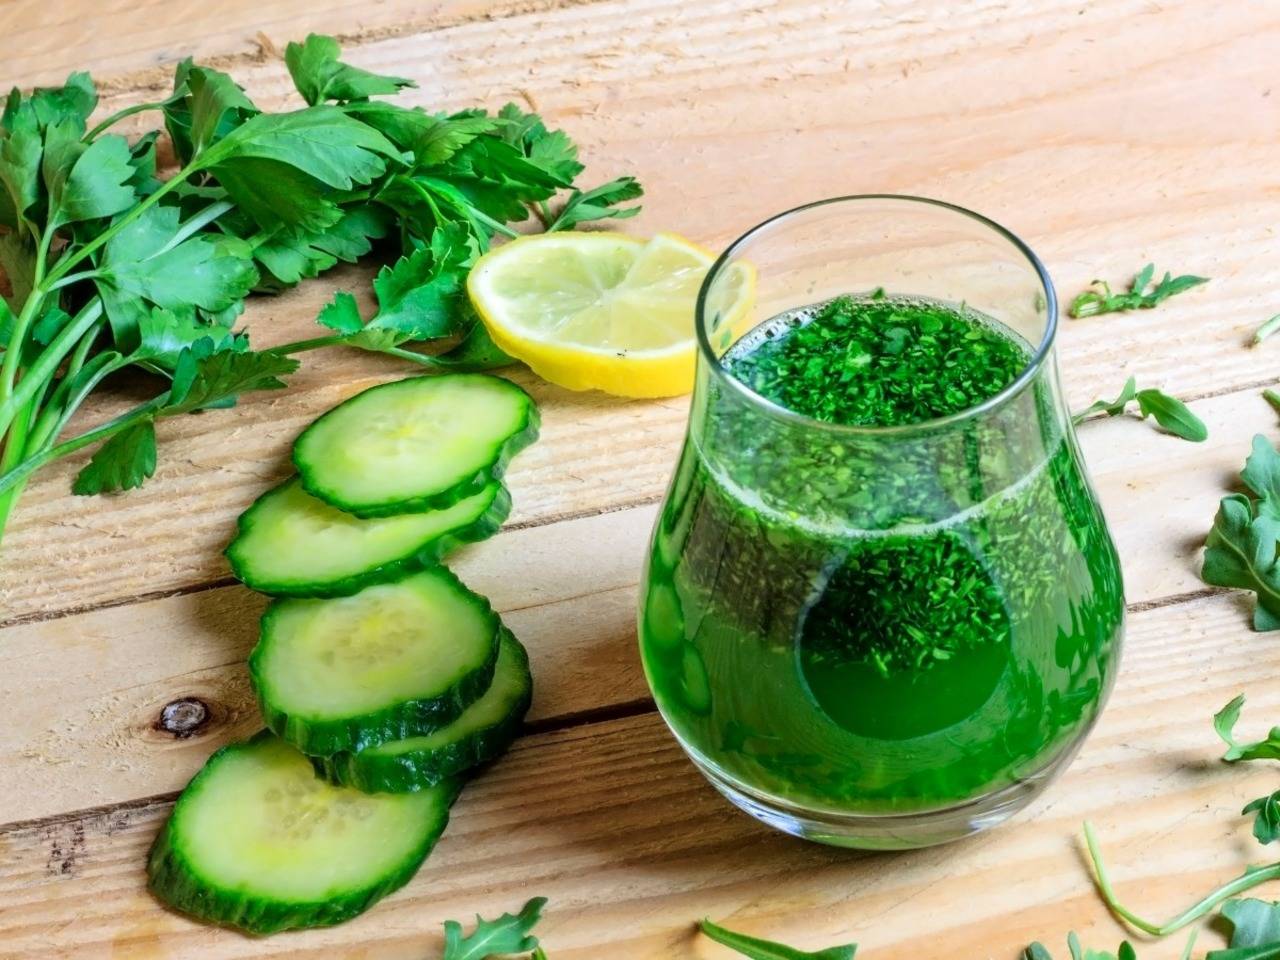 Cucumber Juice Benefits - The Ultimate Healthy Drink for Skin and Hair